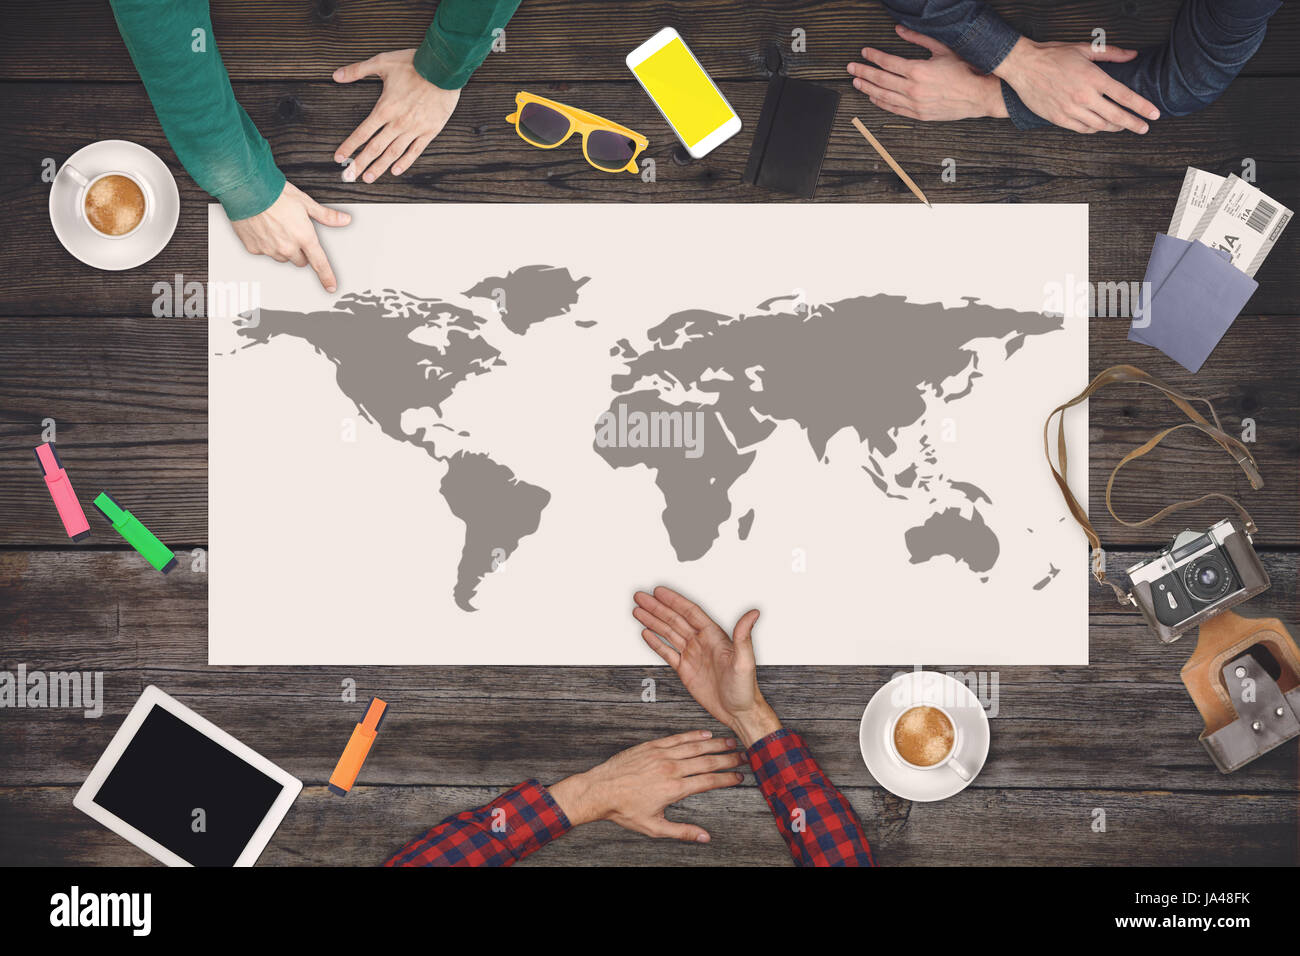 Group of people planning trip. Travel concept. Top view. Stock Photo